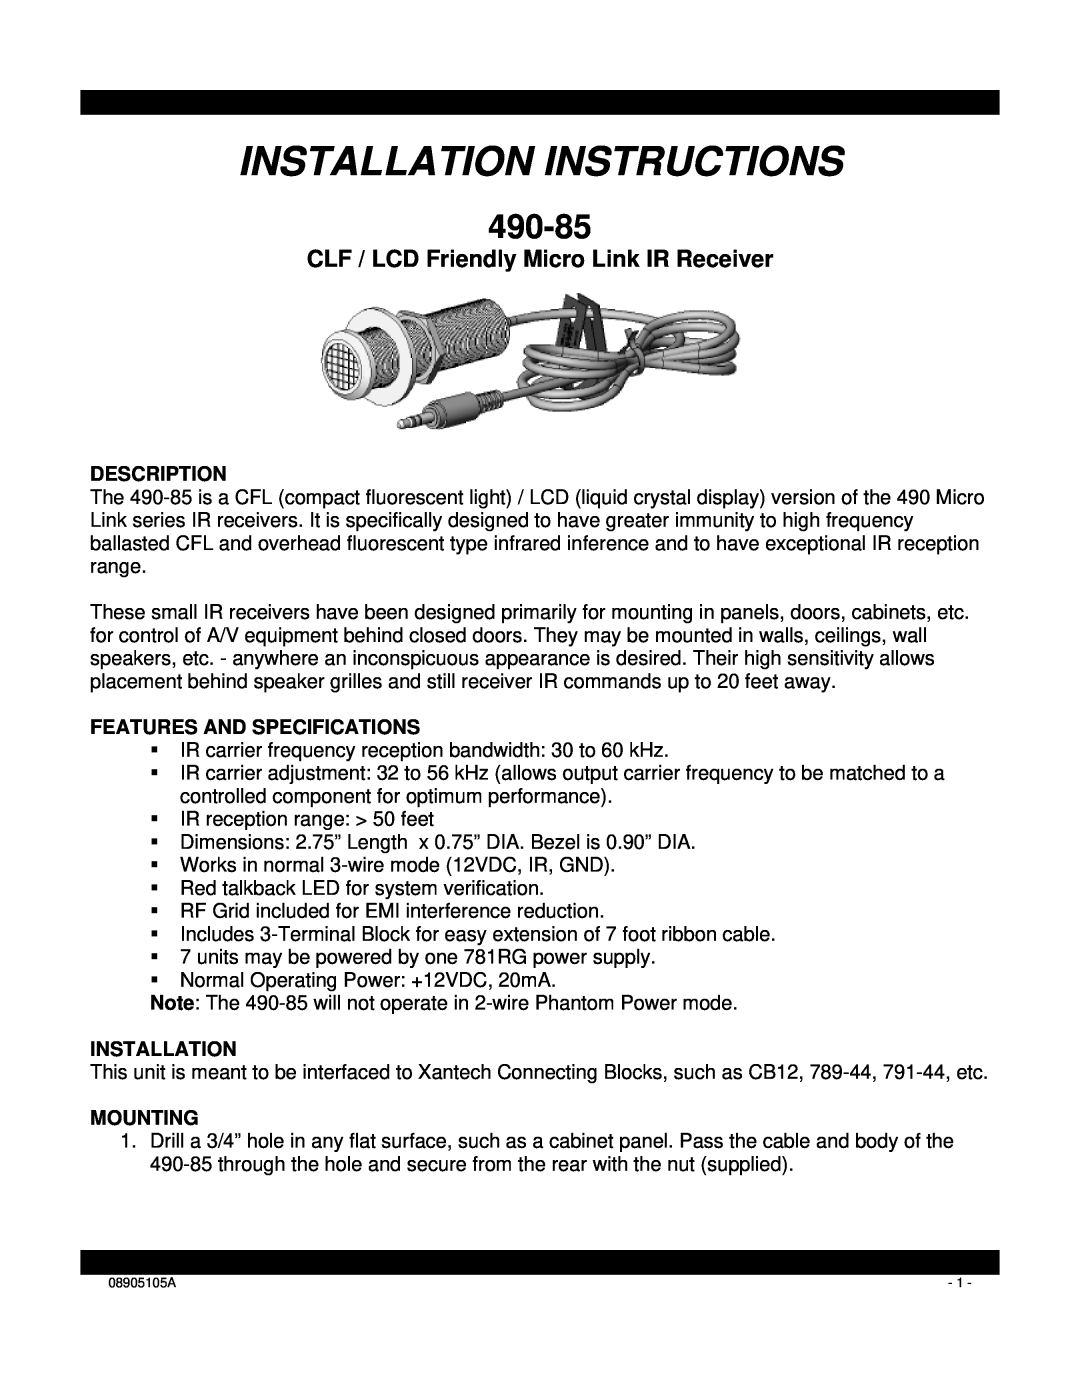 Xantech 490-85 installation instructions Description, Features And Specifications, Installation, Mounting 